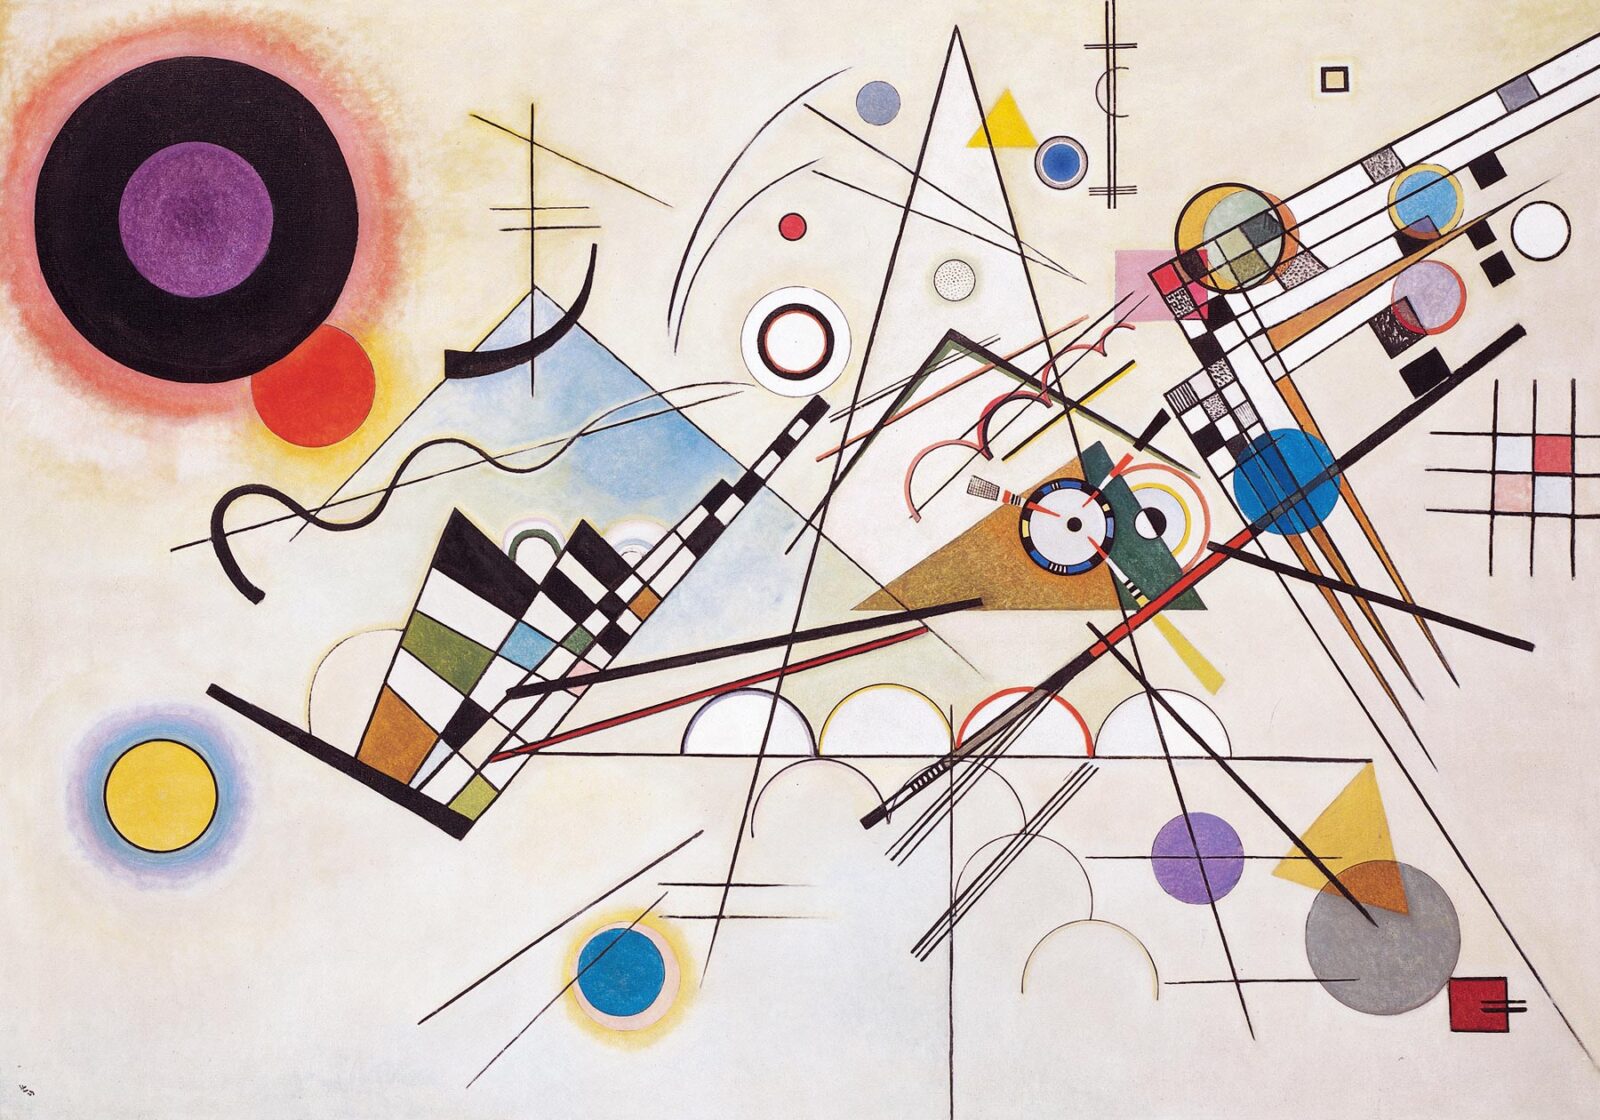 Can You Match These Famous Paintings to Their Legendary Creators? Composition VIII by Wassily Kandinsky